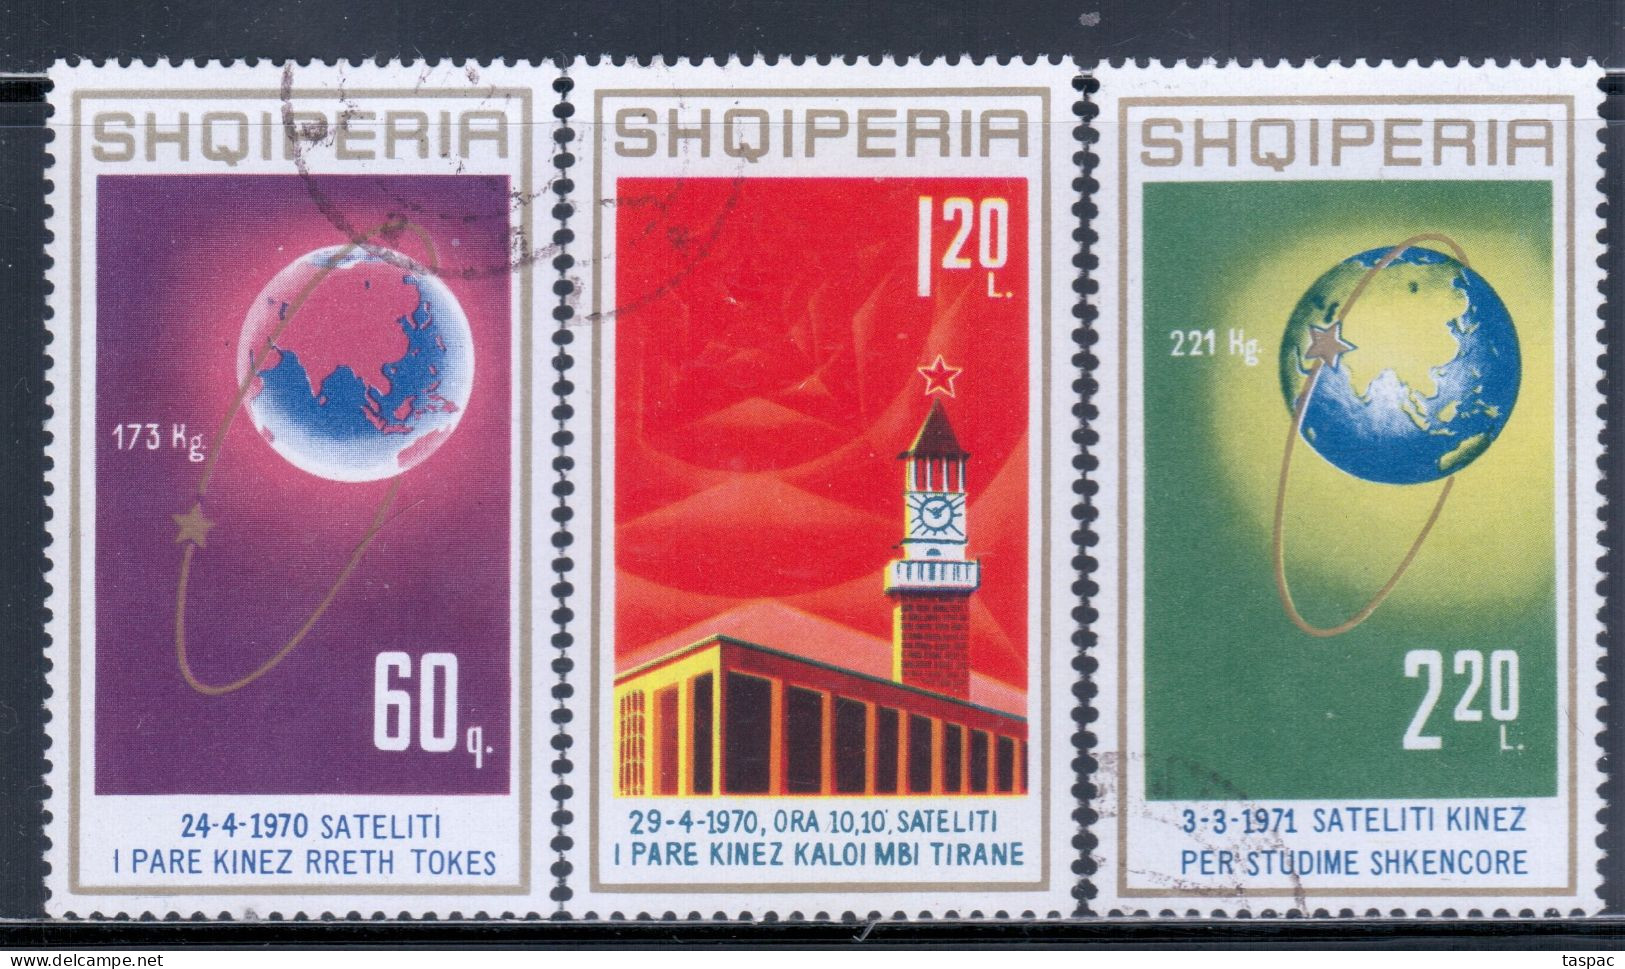 Albania 1971 Mi# 1486-1488 Used - Space Developments Of People's Republic Of China - Europe